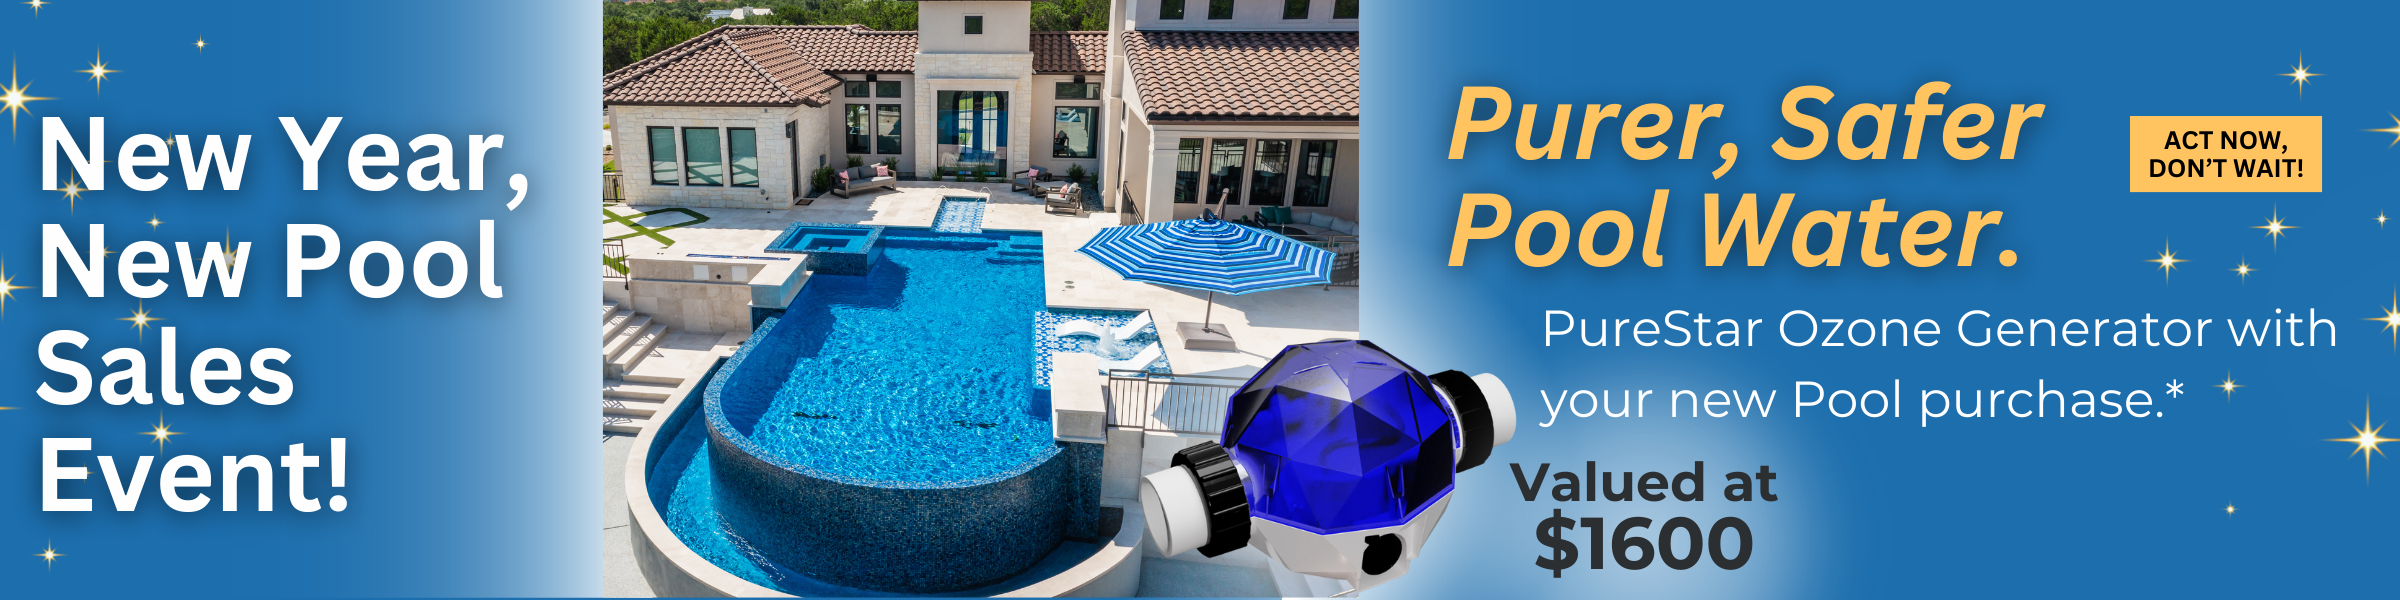 New Year, New Pool Sales Event! Free Ozone Generator with New Pool